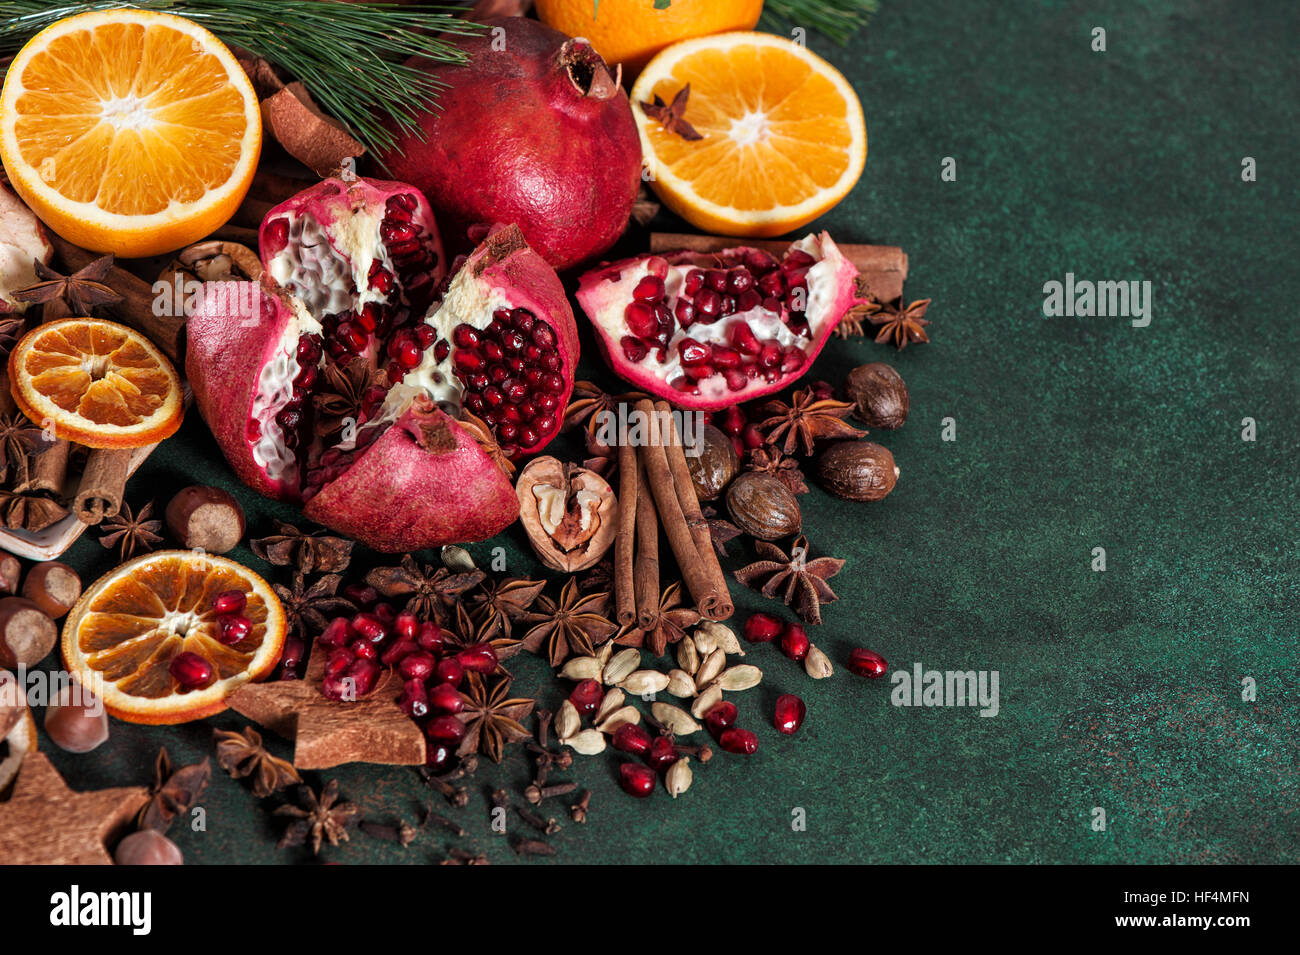 https://c8.alamy.com/comp/HF4MFN/fruits-pomegranate-and-orange-with-spices-and-ingredients-for-mulled-HF4MFN.jpg